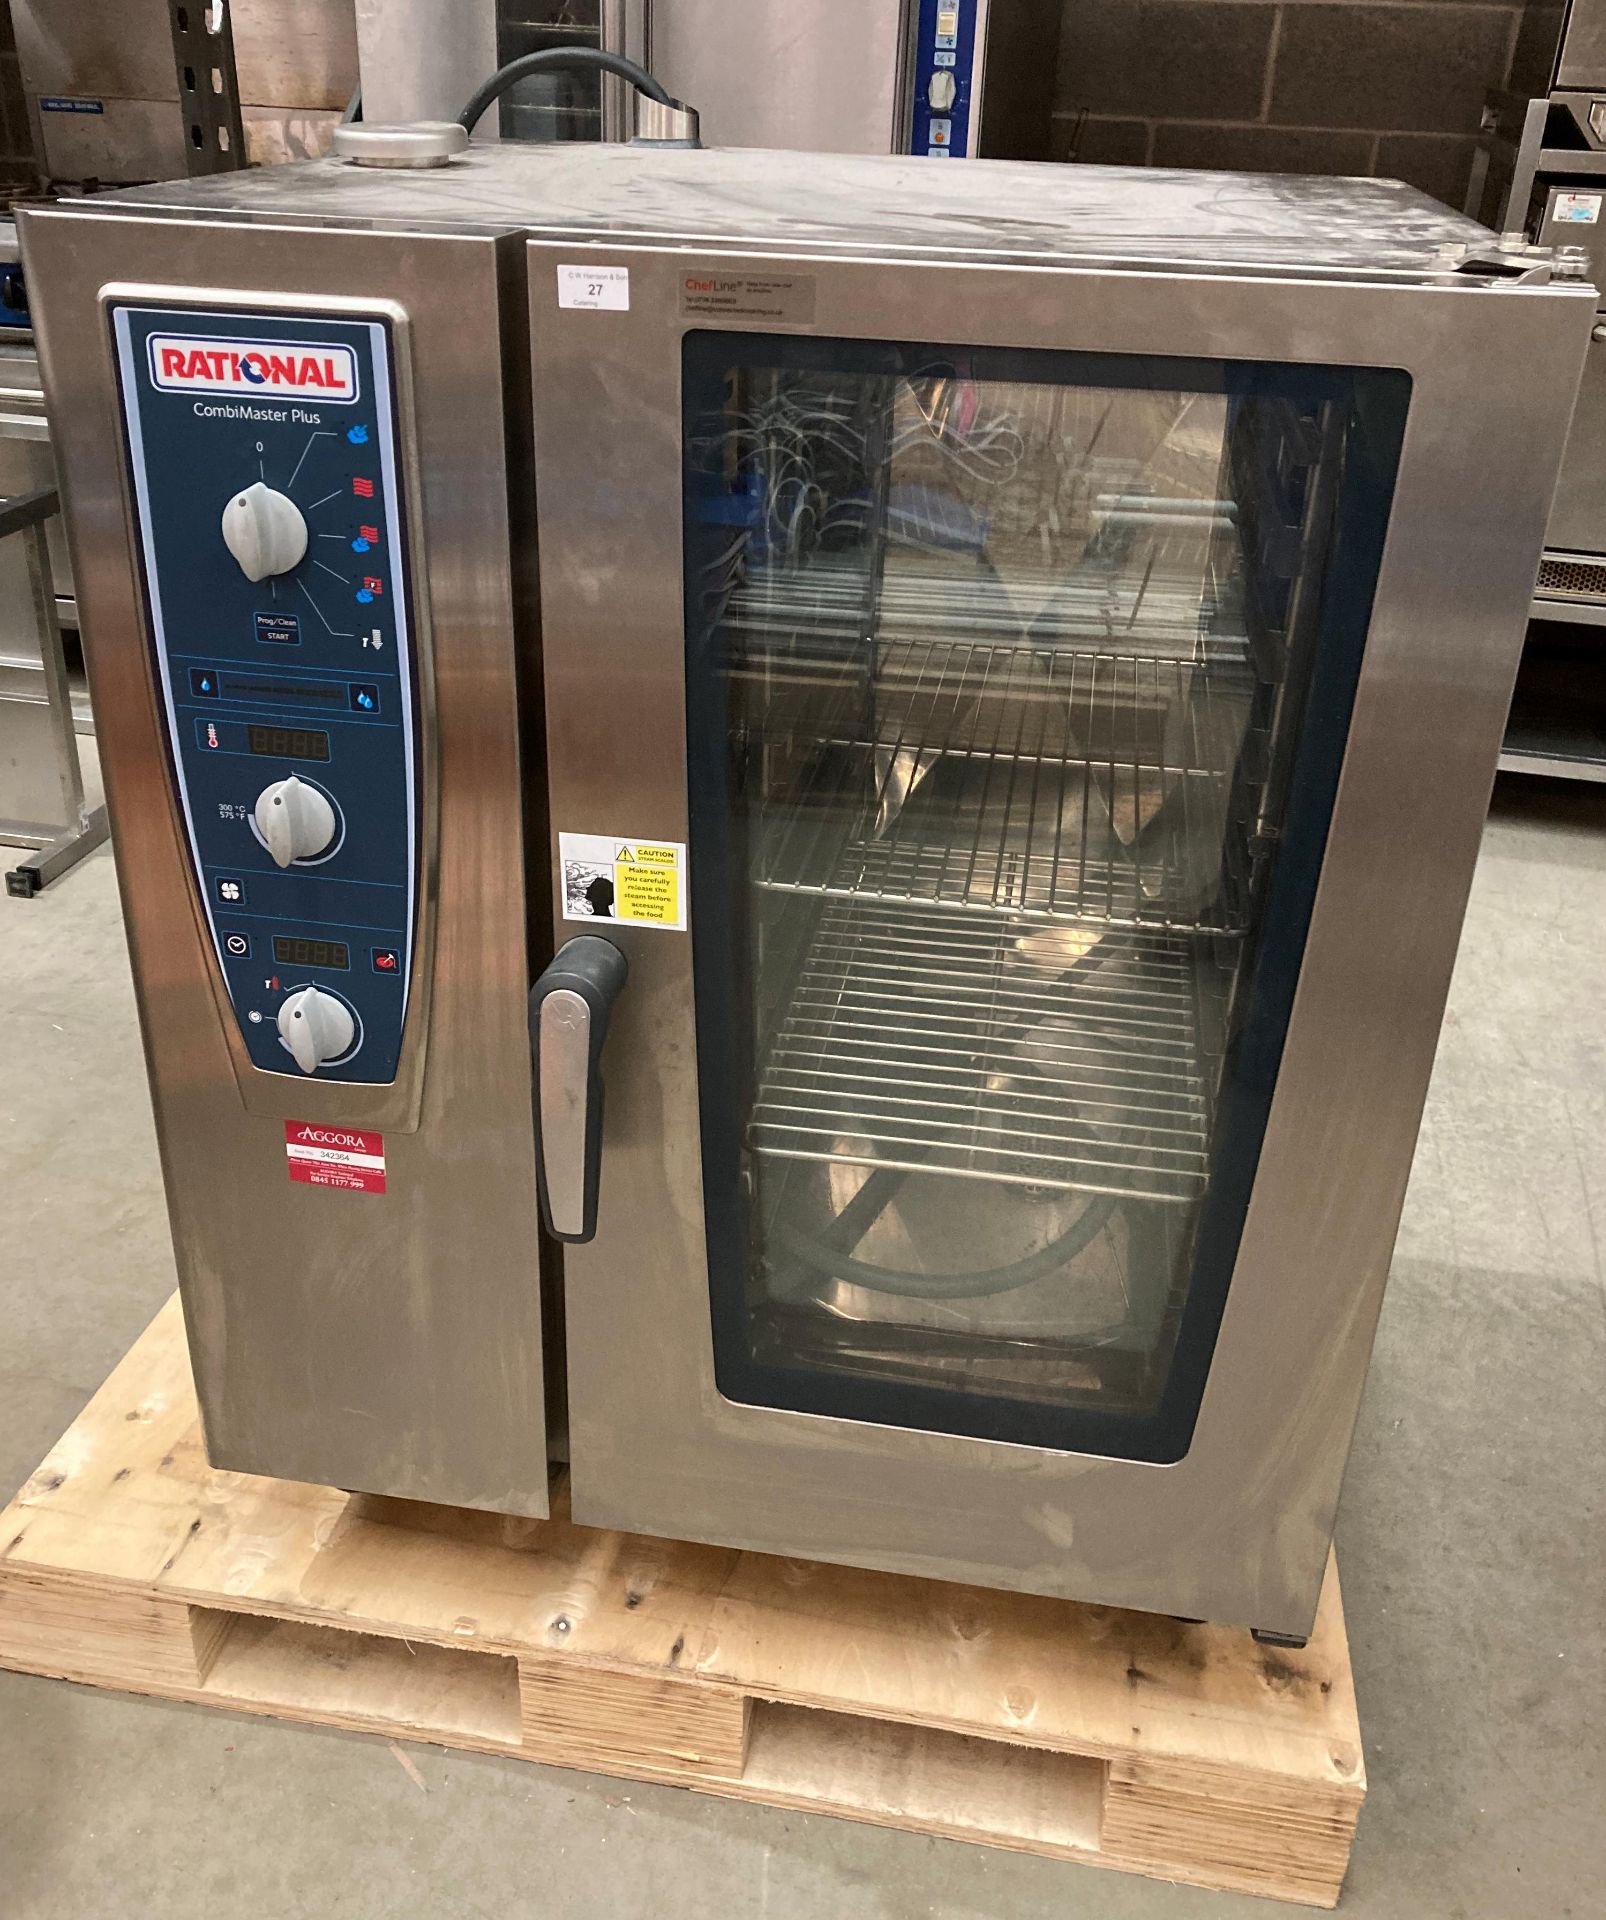 Rational combi master plus stainless steel commercial oven on stand model CMP101 18.